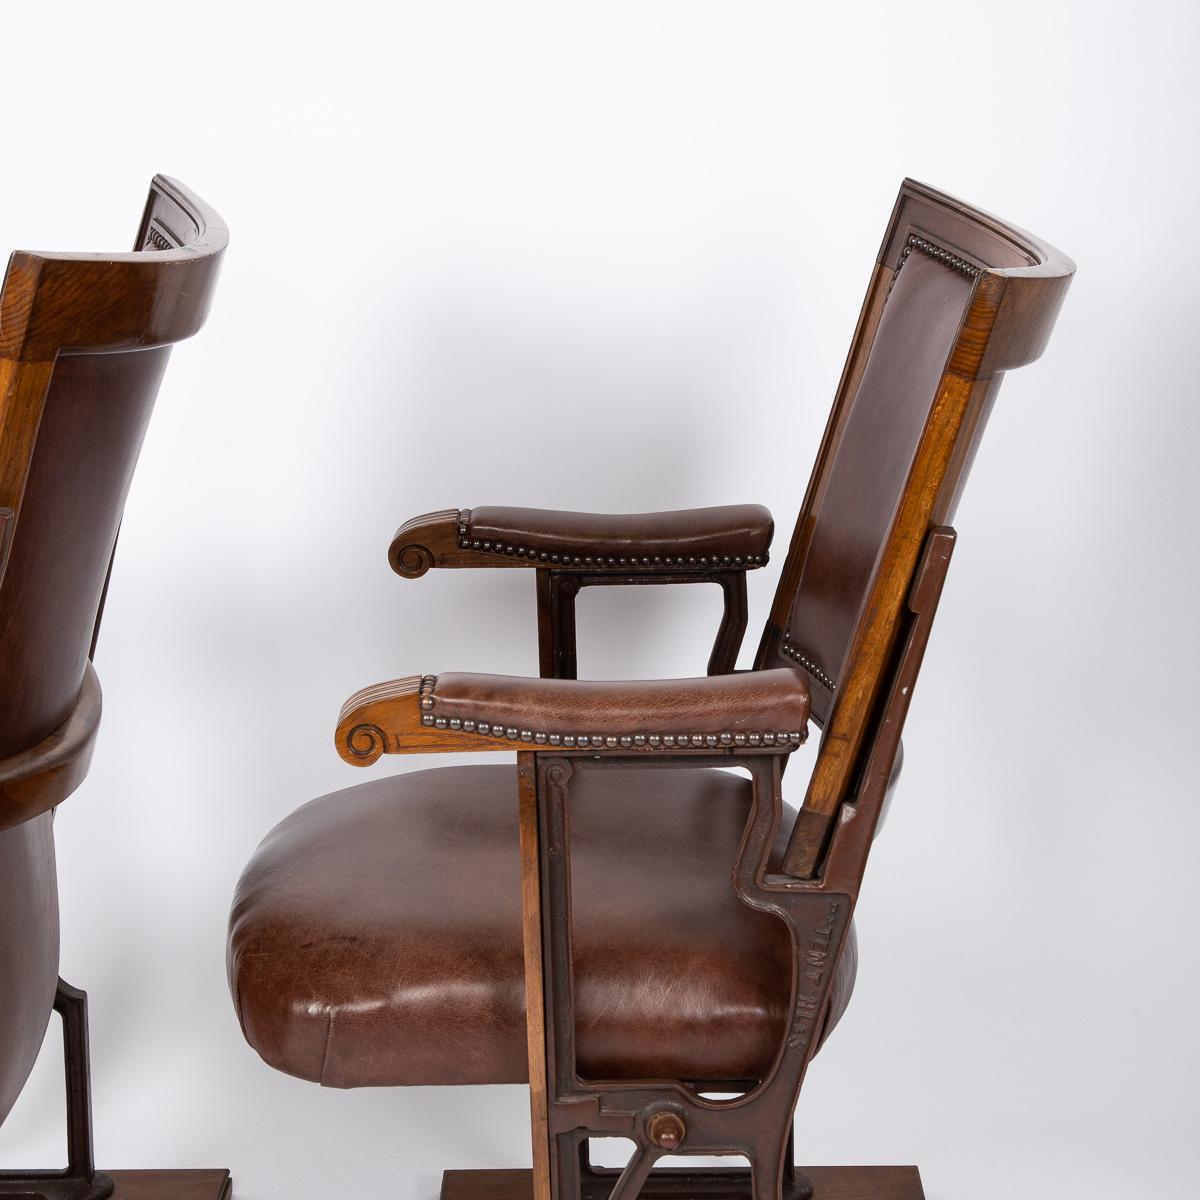 20th Century Edwardian Mahogany and Leather Cinema / Theatre Chairs, circa 1900 For Sale 10